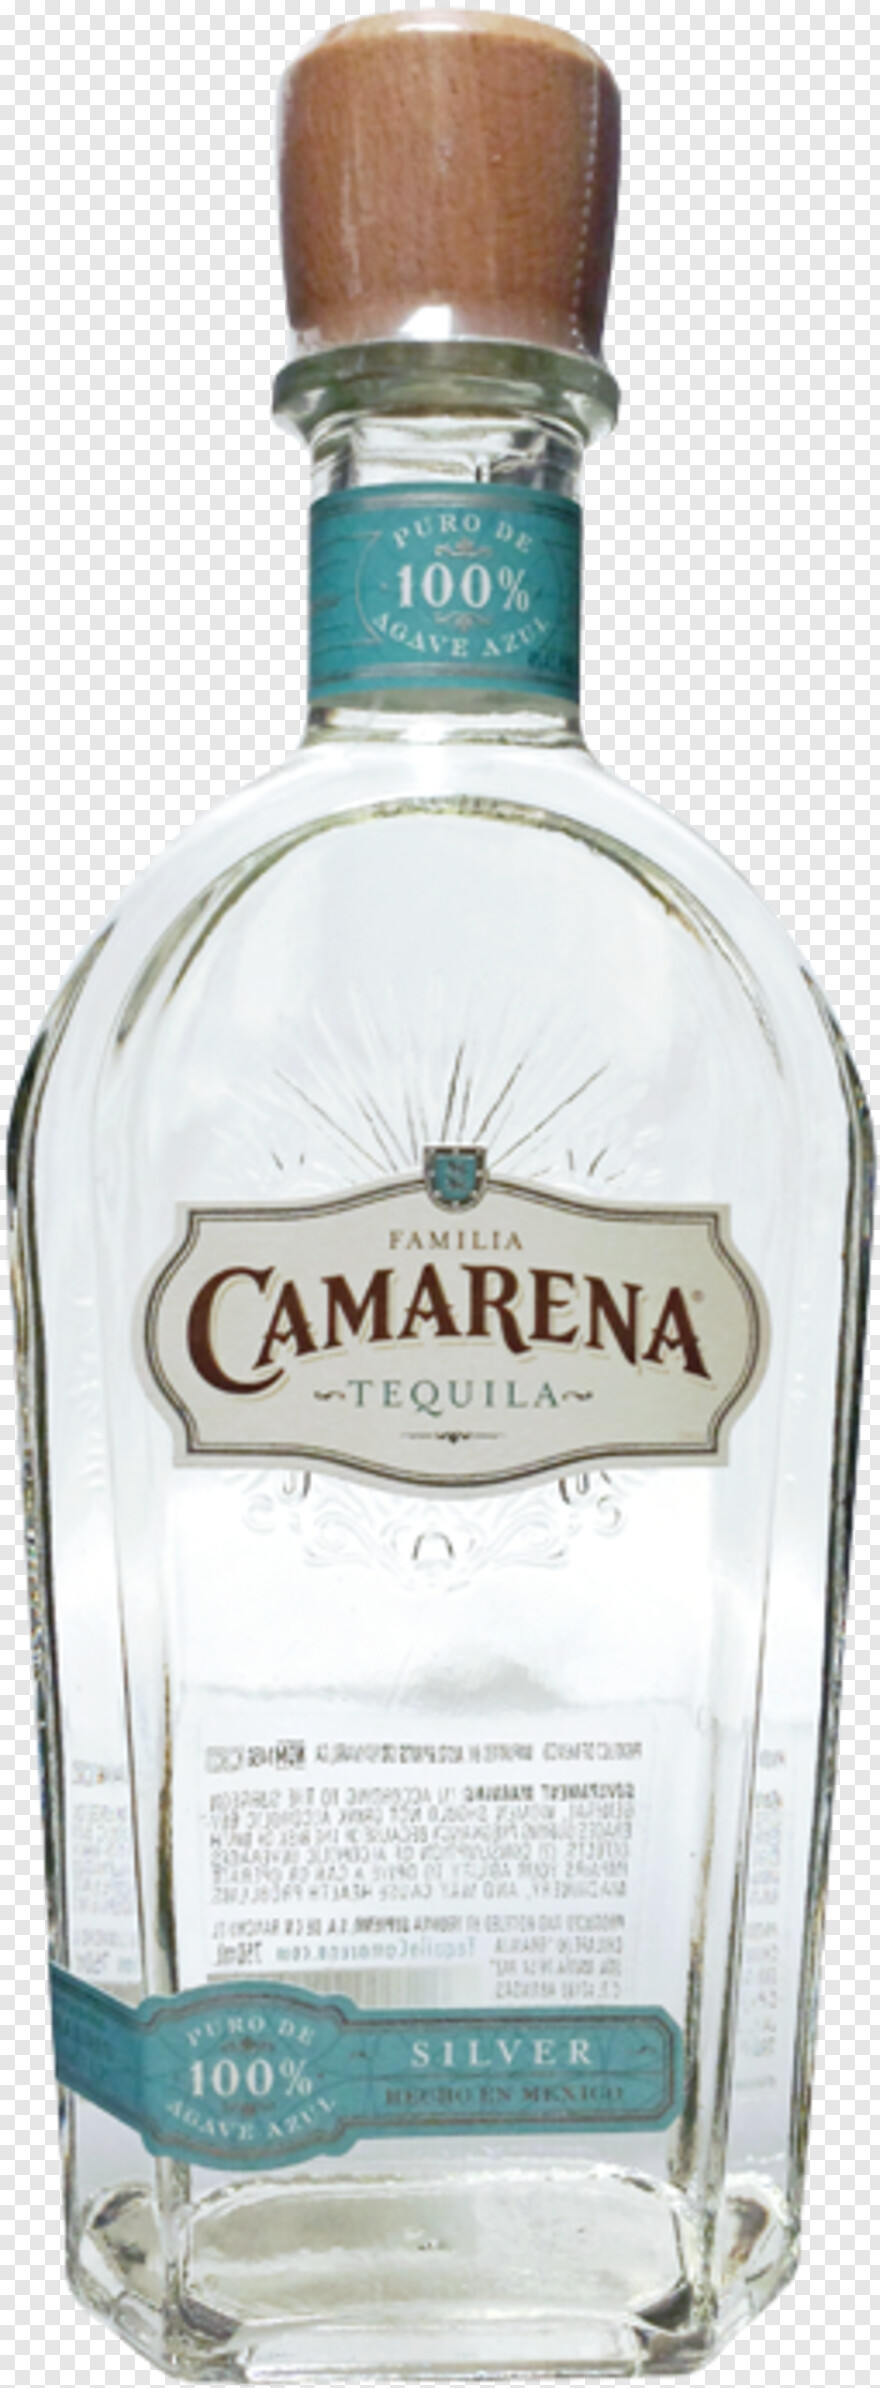  Tequila Bottle, Silver Border, Tequila Shot, Silver Ribbon, Silver Line, Tequila